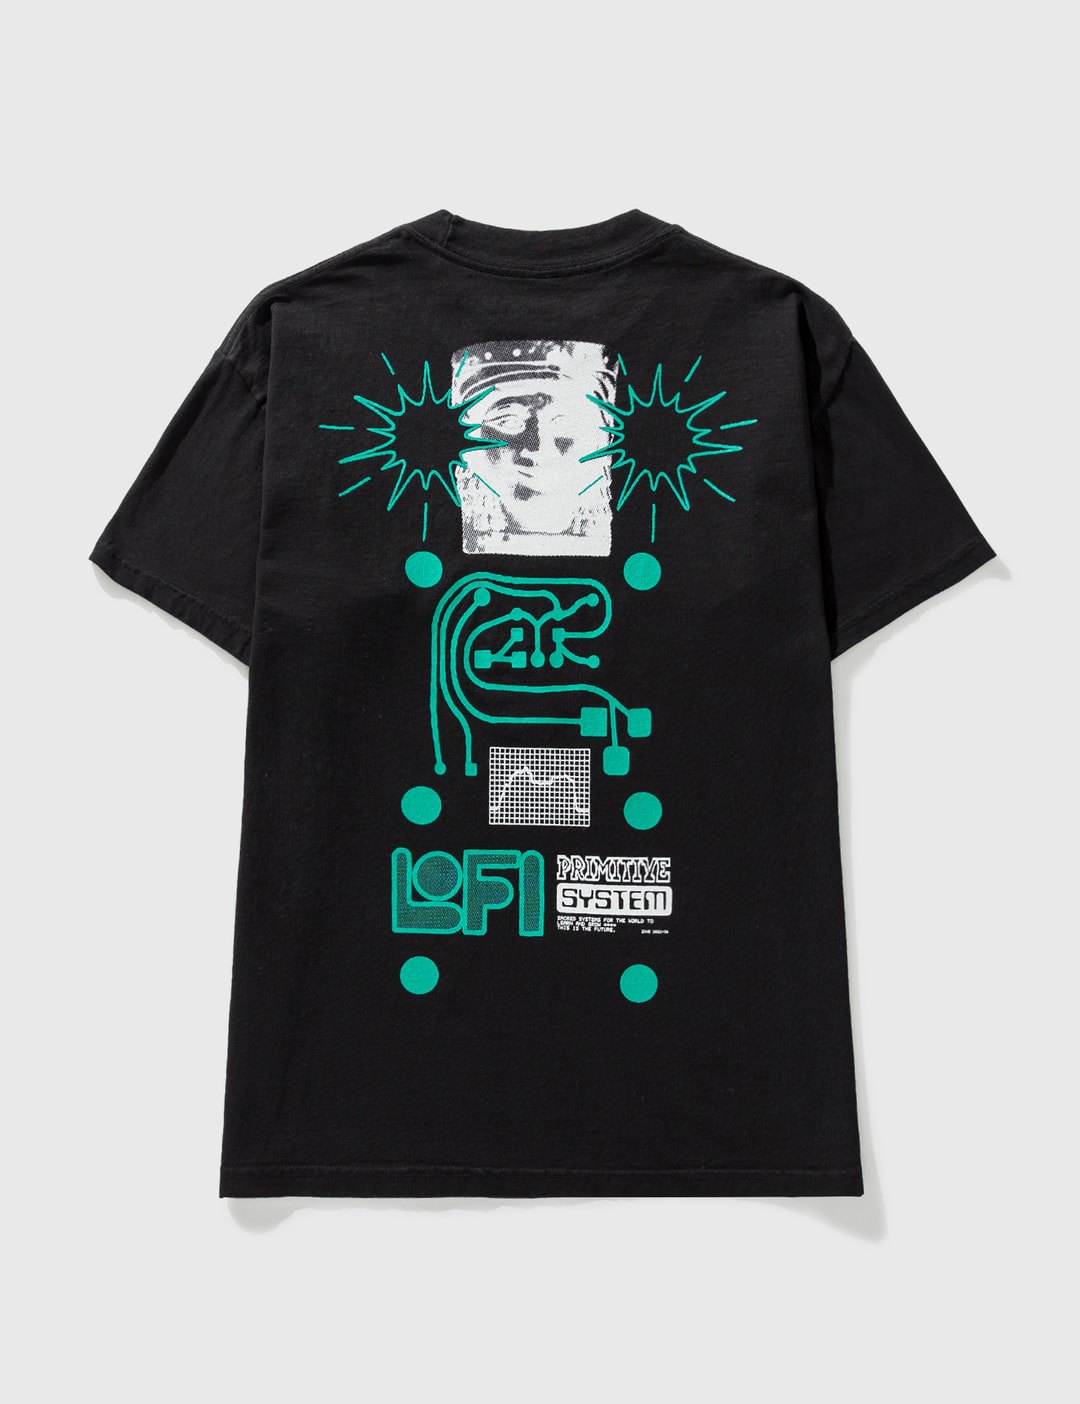 Lo-Fi - Primitive System T-shirt | HBX - Globally Curated Fashion and ...